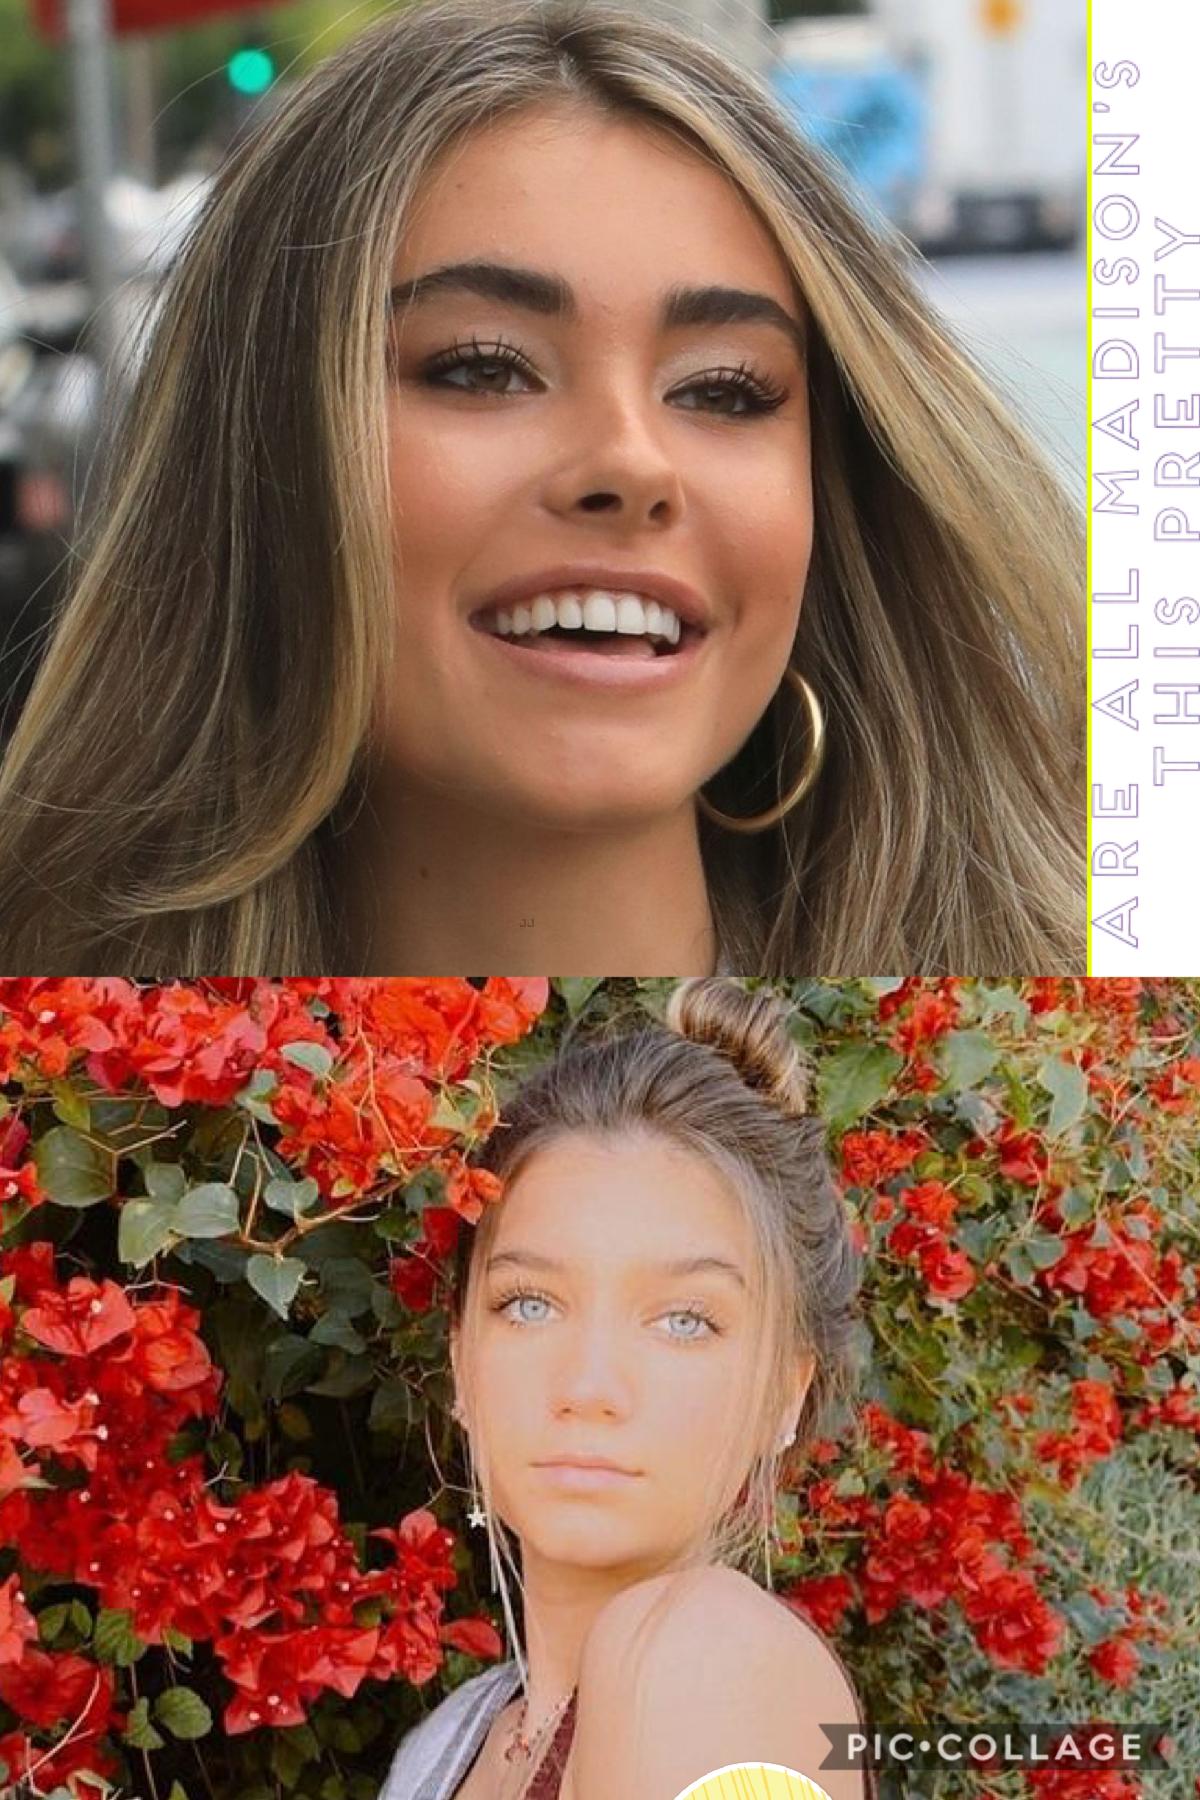 First to comment where the yellow semi circle in the collage is gets a shout out in my next collage ft. Madison beer and Madison Lewis!